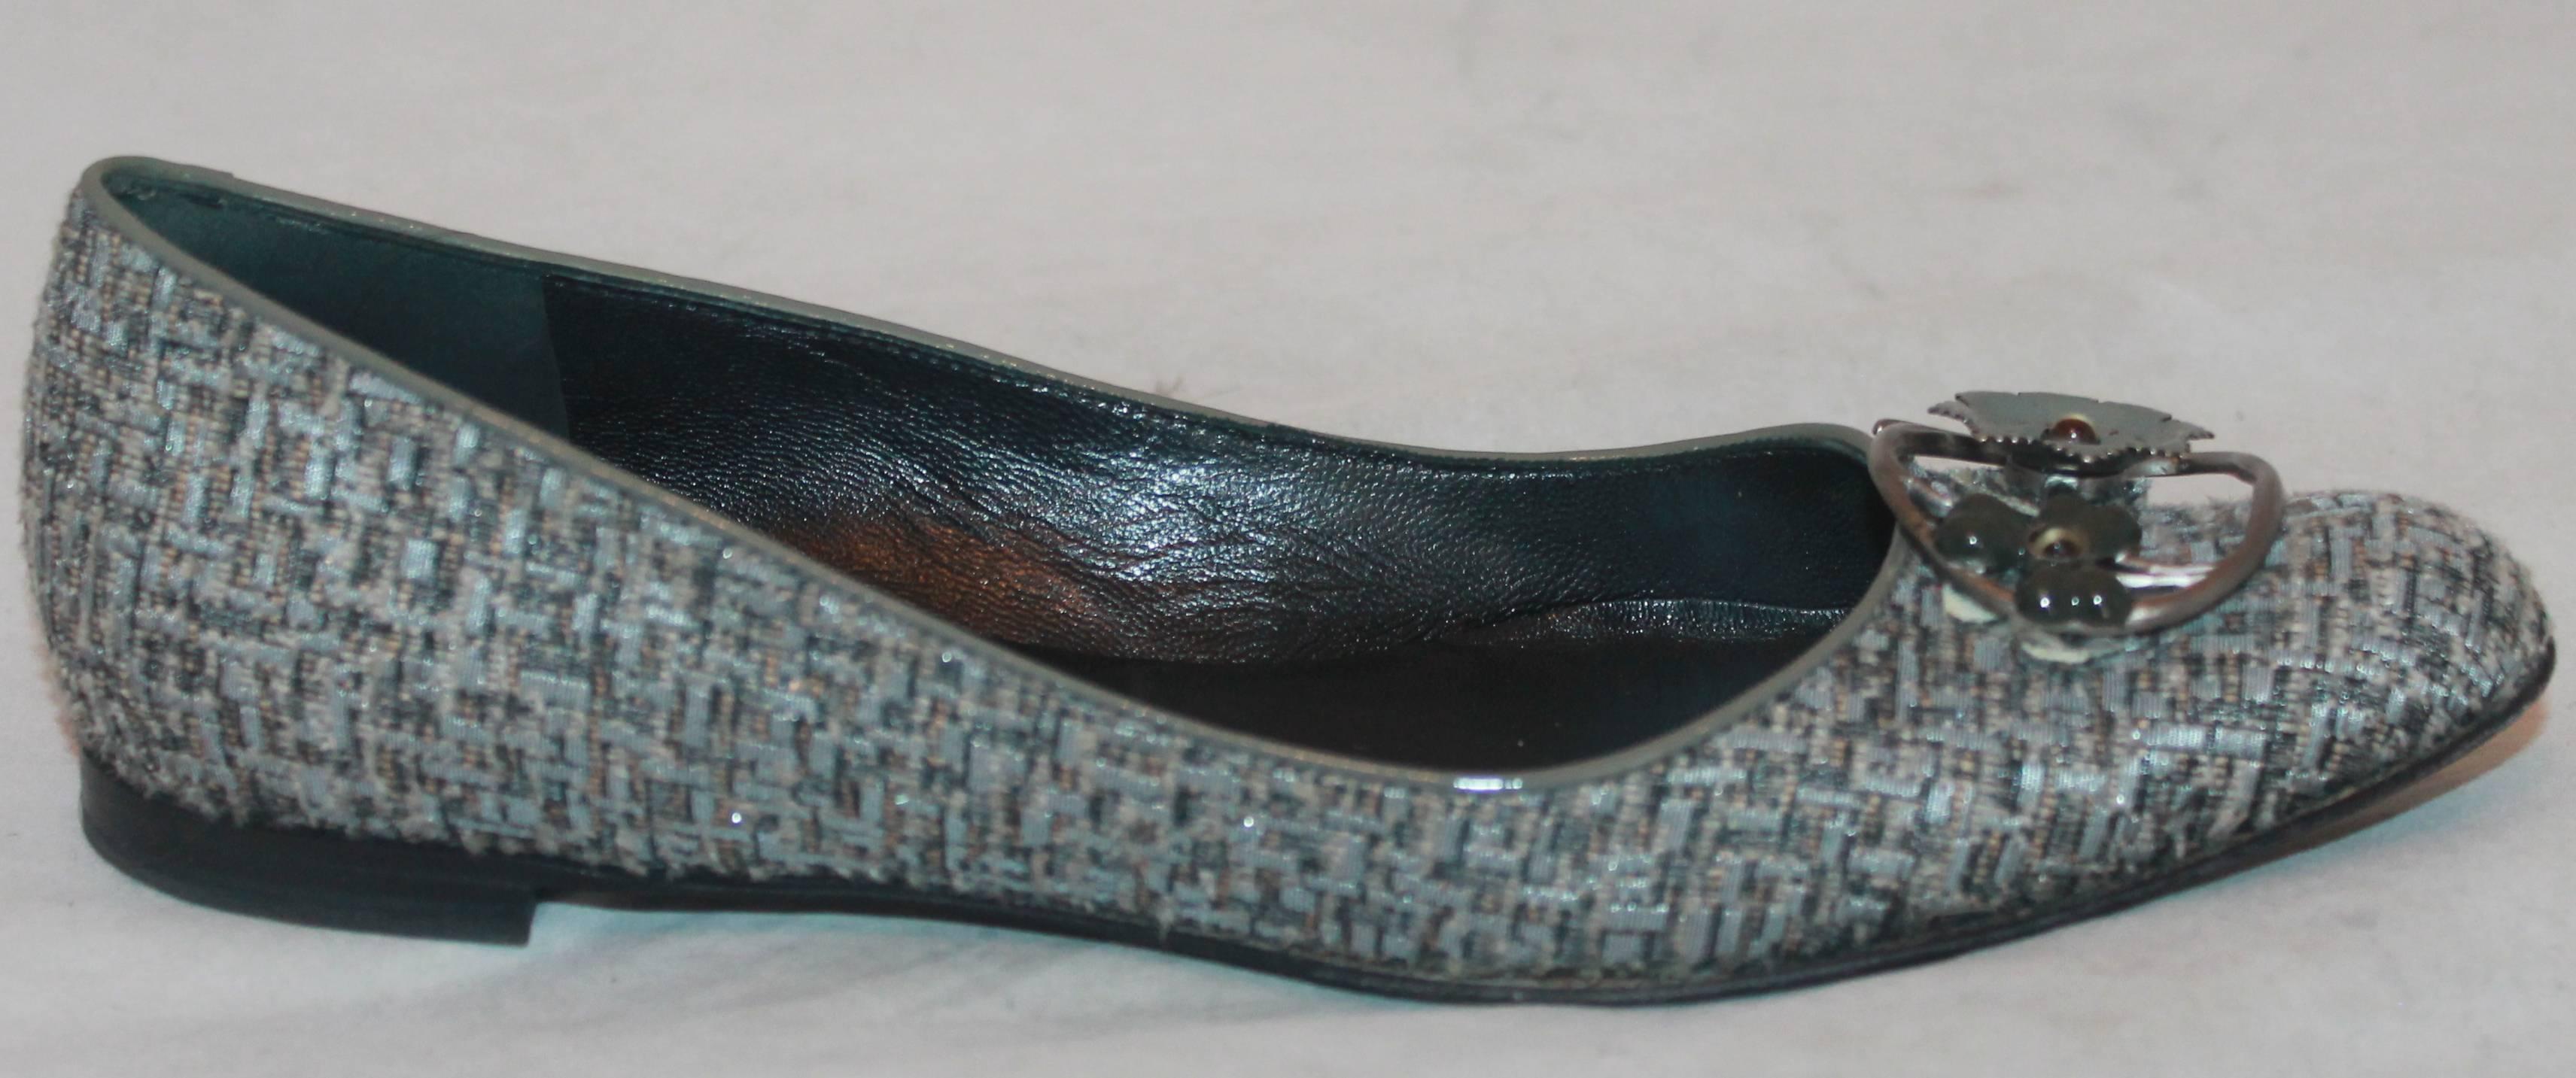 Salvatore Ferragamo Grey Tweed w/ metal Flower Toe Buckle - 7AA.  These lovely shoes are in very good condition with only some wear on the bottom.  They feature a pretty grey tweed material, a metal flower and clover piece on the toe, and a great